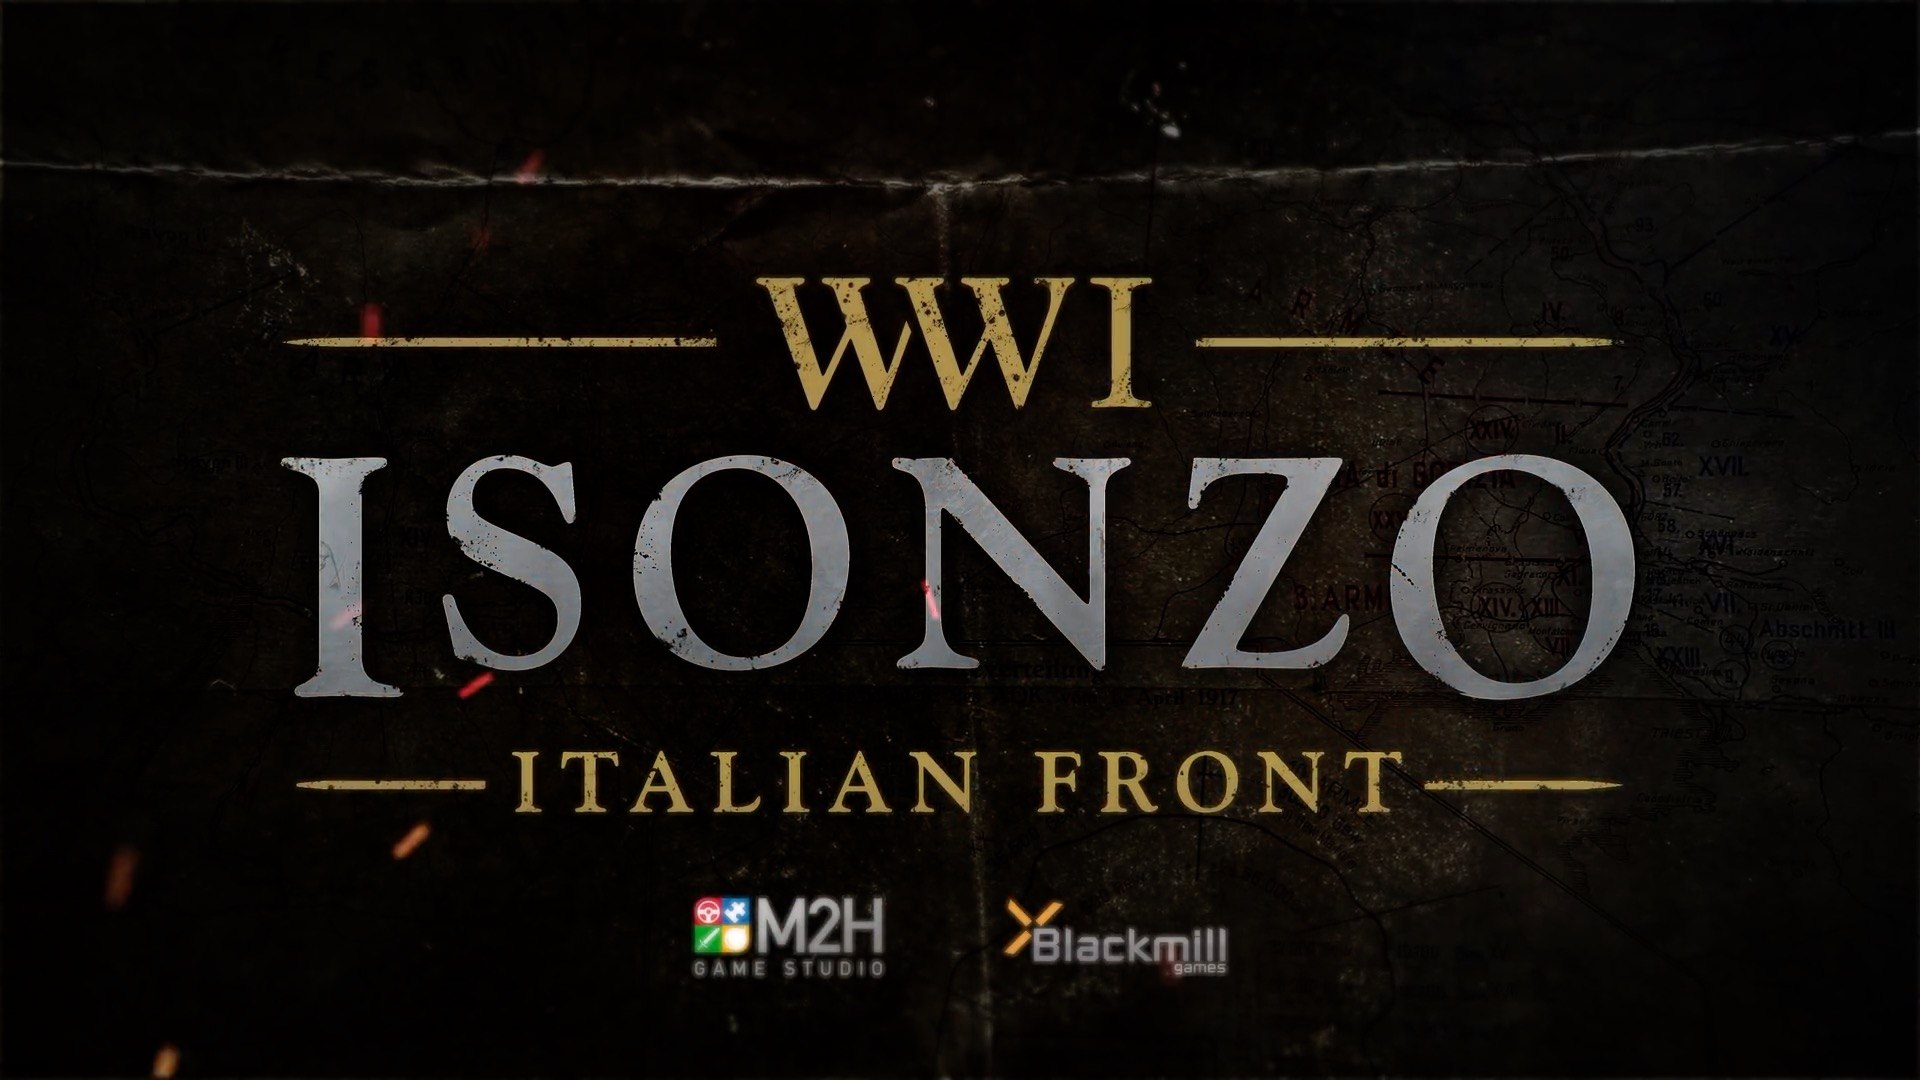 WWI Isonzo - Italian front - Trailer I PS5 - video Dailymotion